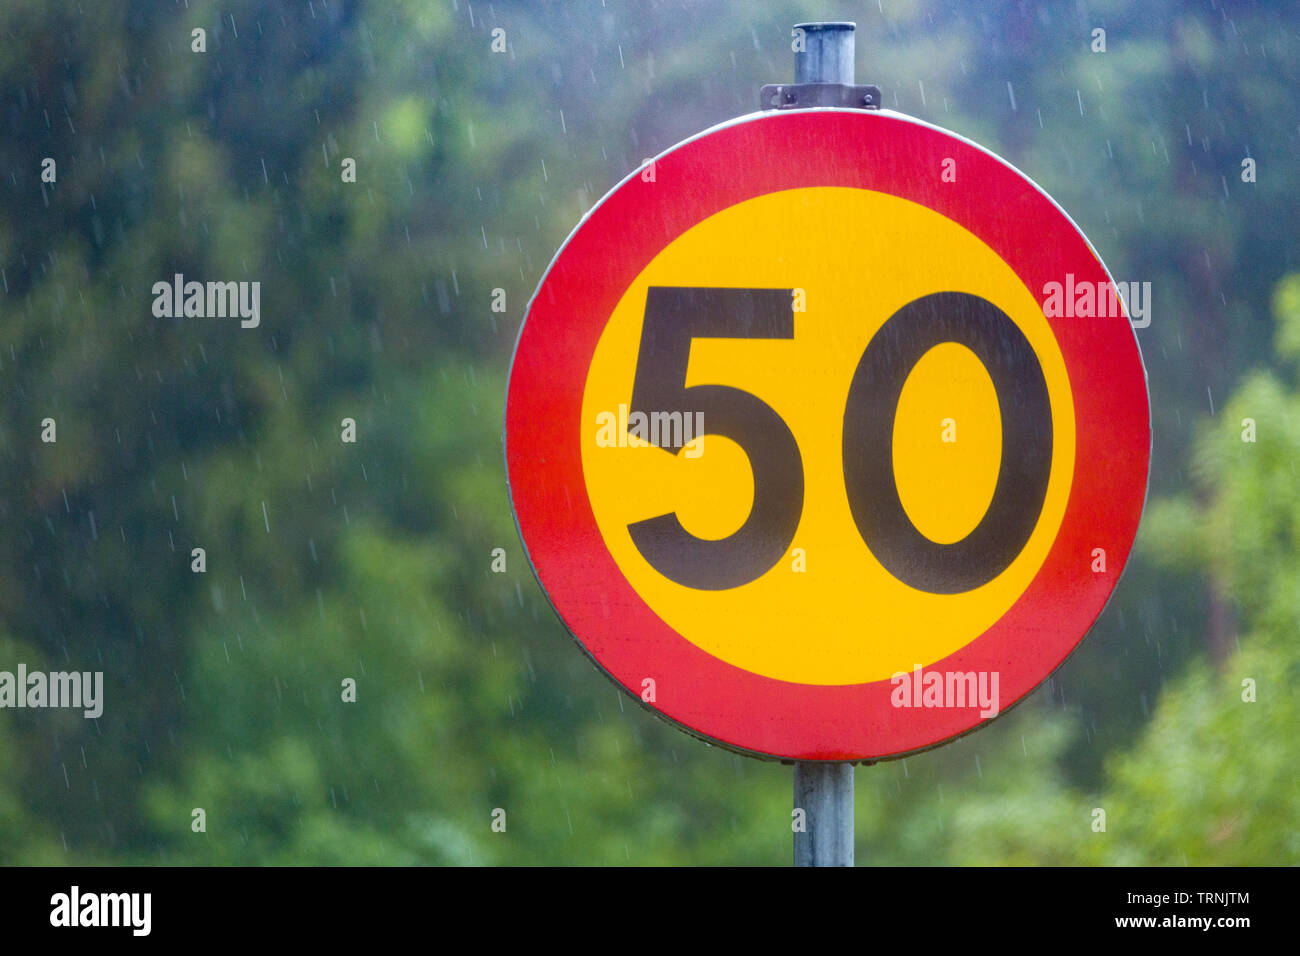 Close  up view of 50 km kilometres per hour speed traffic sign against beautiful out of focus blurry nature background Stock Photo